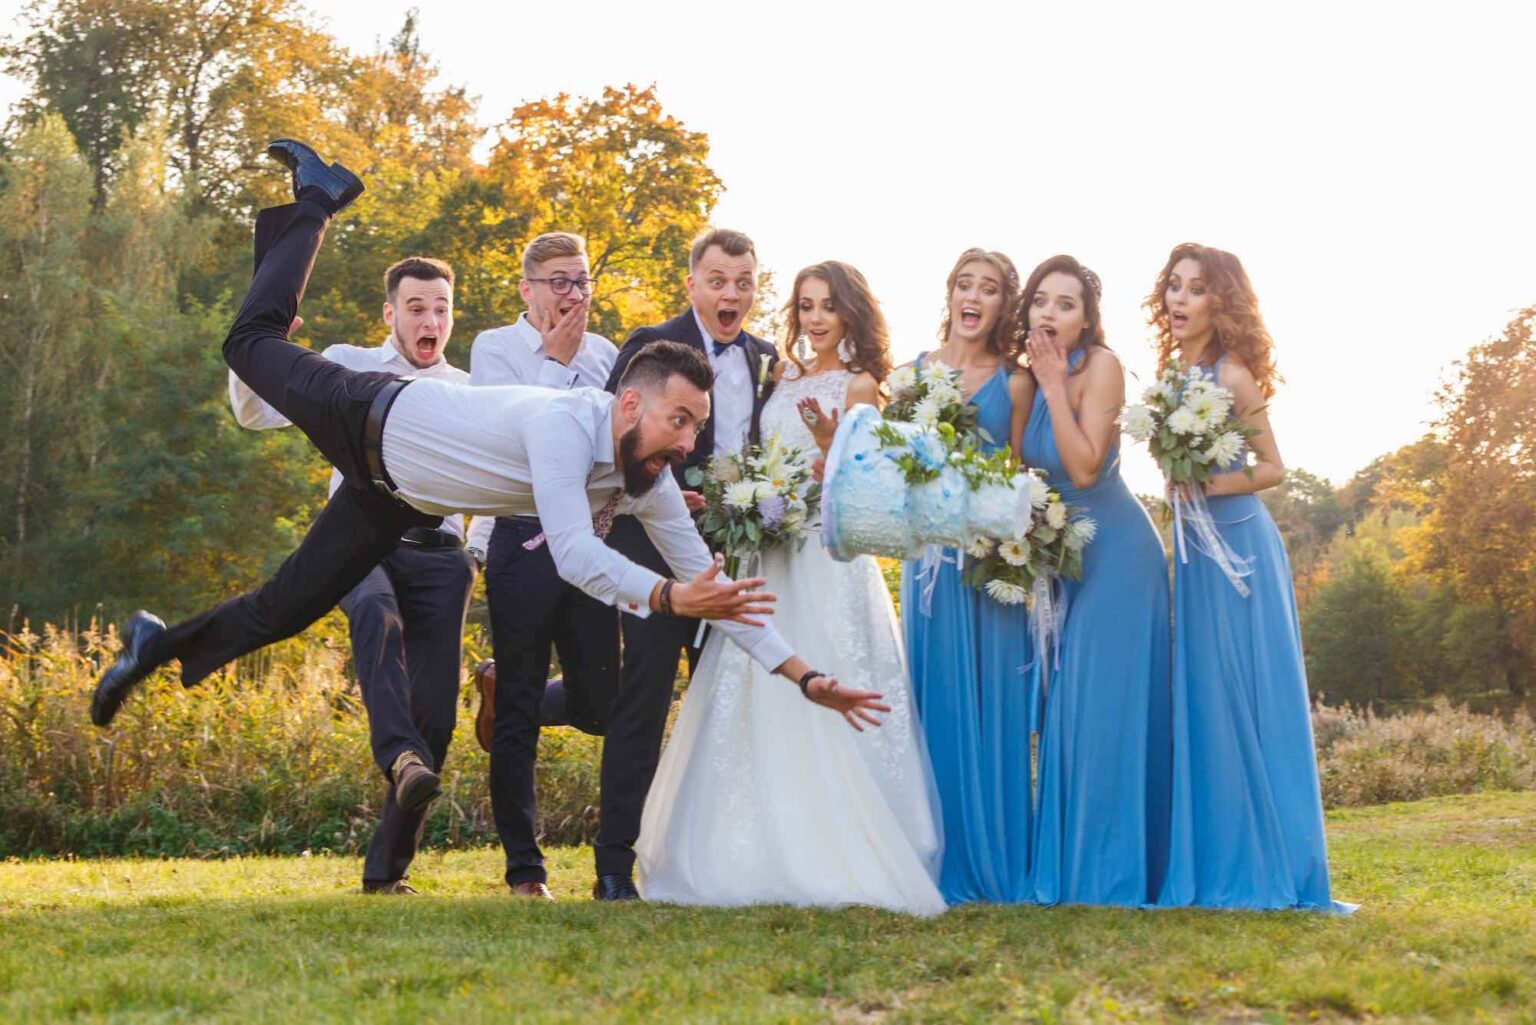 The wedding ceremony is for the bride & groom, but the wedding reception is for everyone. Here are some huge fails from receptions.